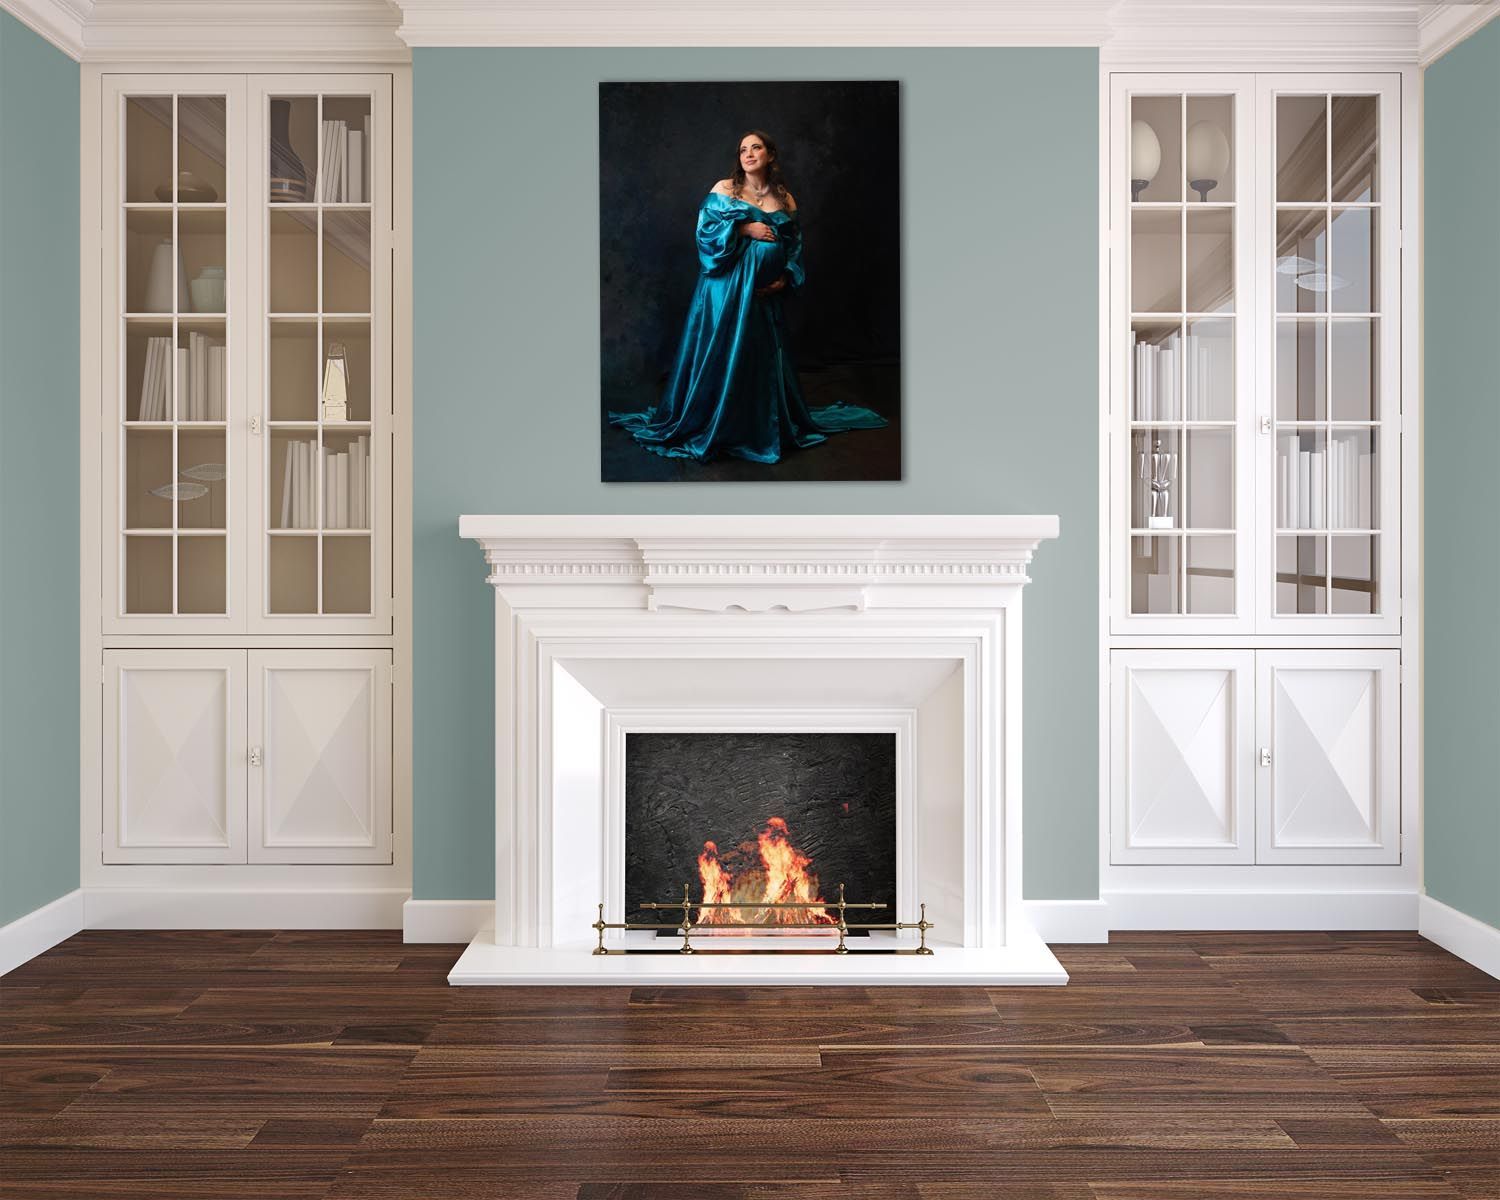 Glendale maternity Modern hearth with pregnancy portrait hung above. Blue flowing gown. 